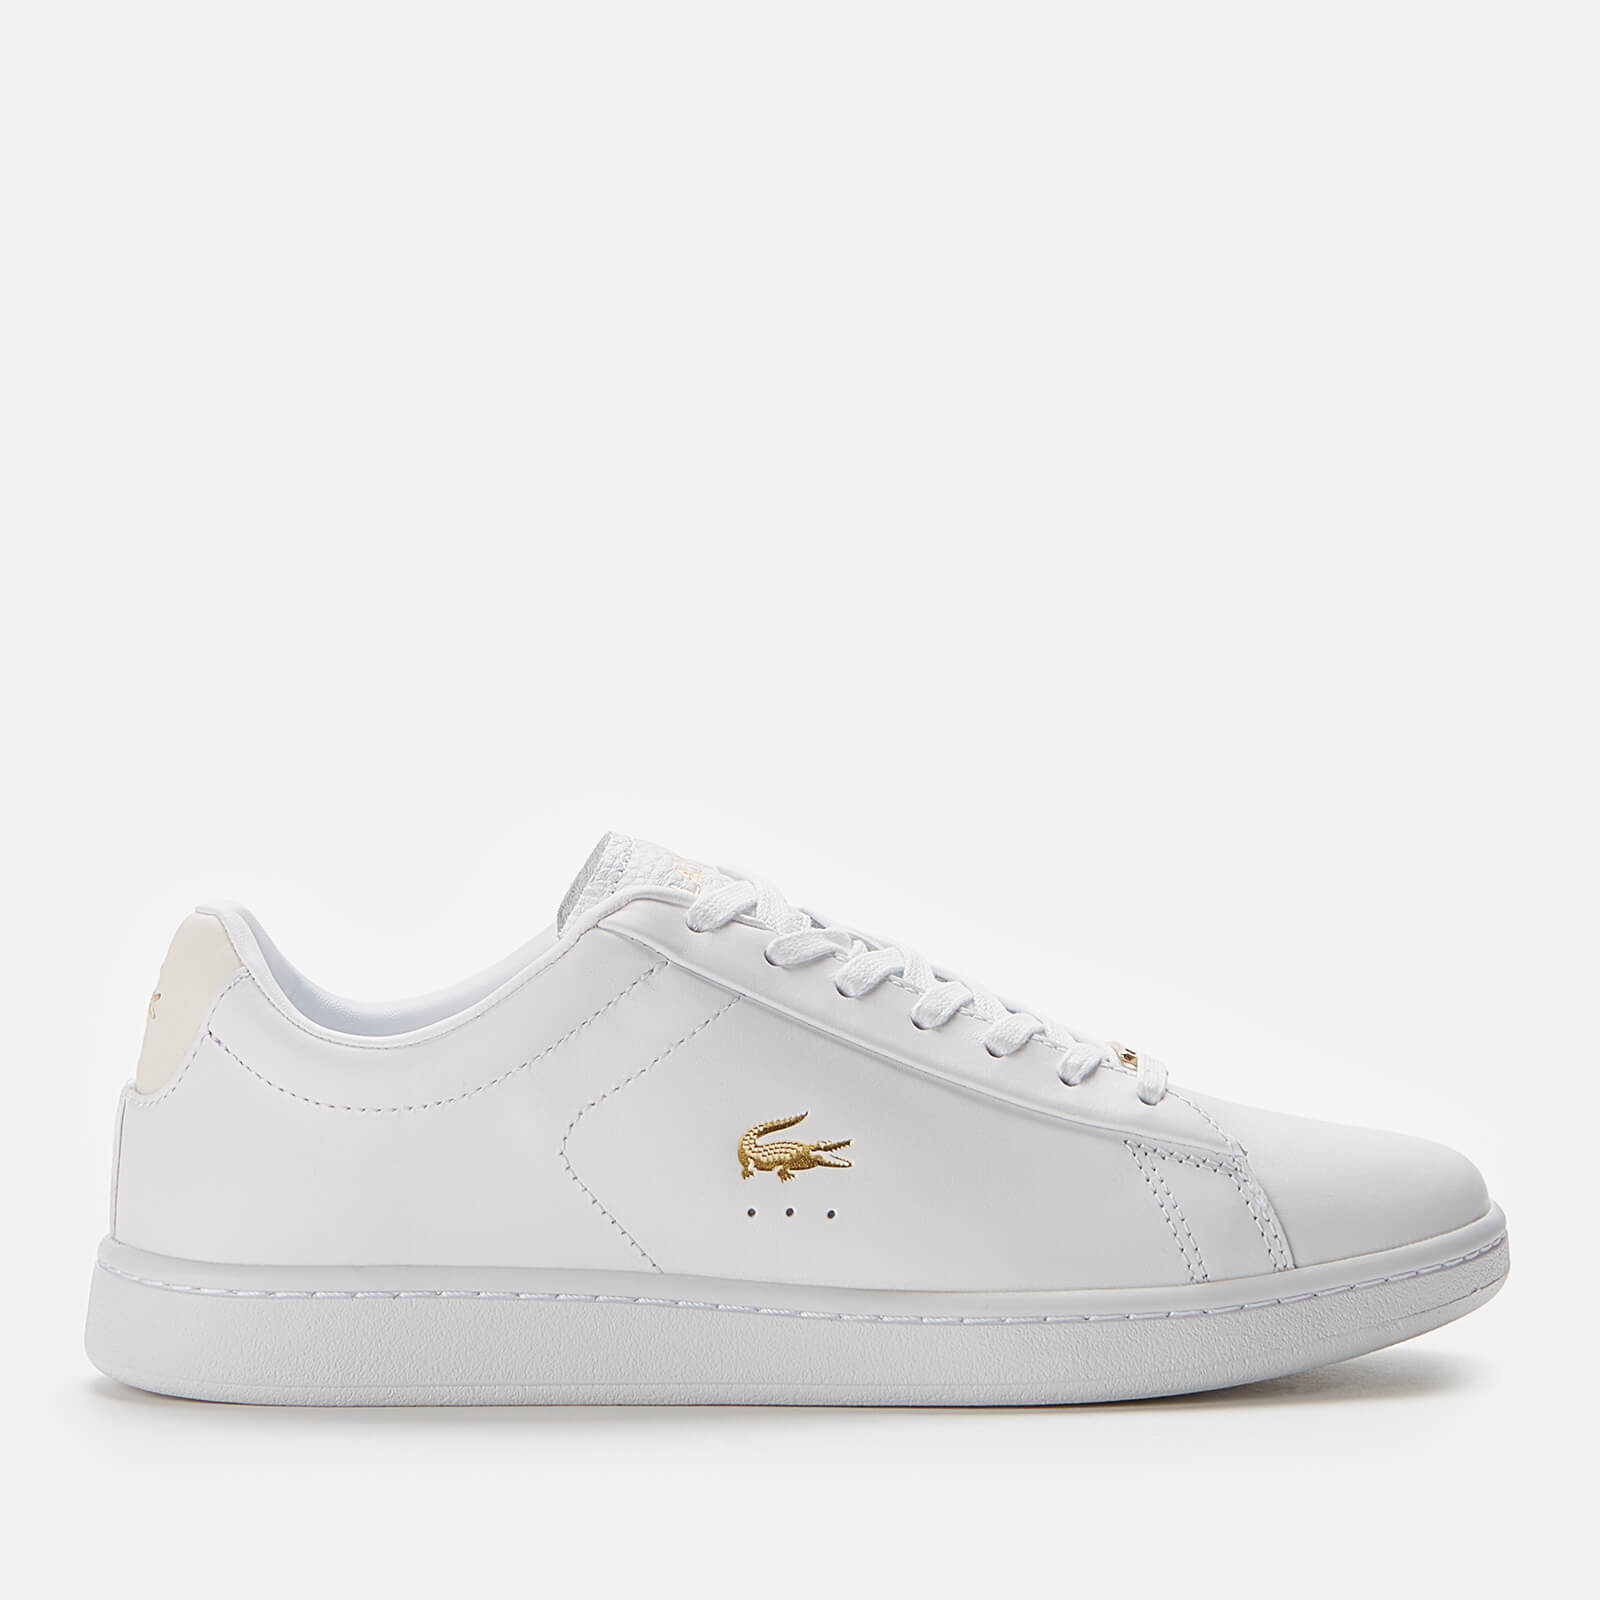 Lacoste Women's Carnaby Evo 0722 1 Leather Cupsole Trainers - White/Gold - UK 3